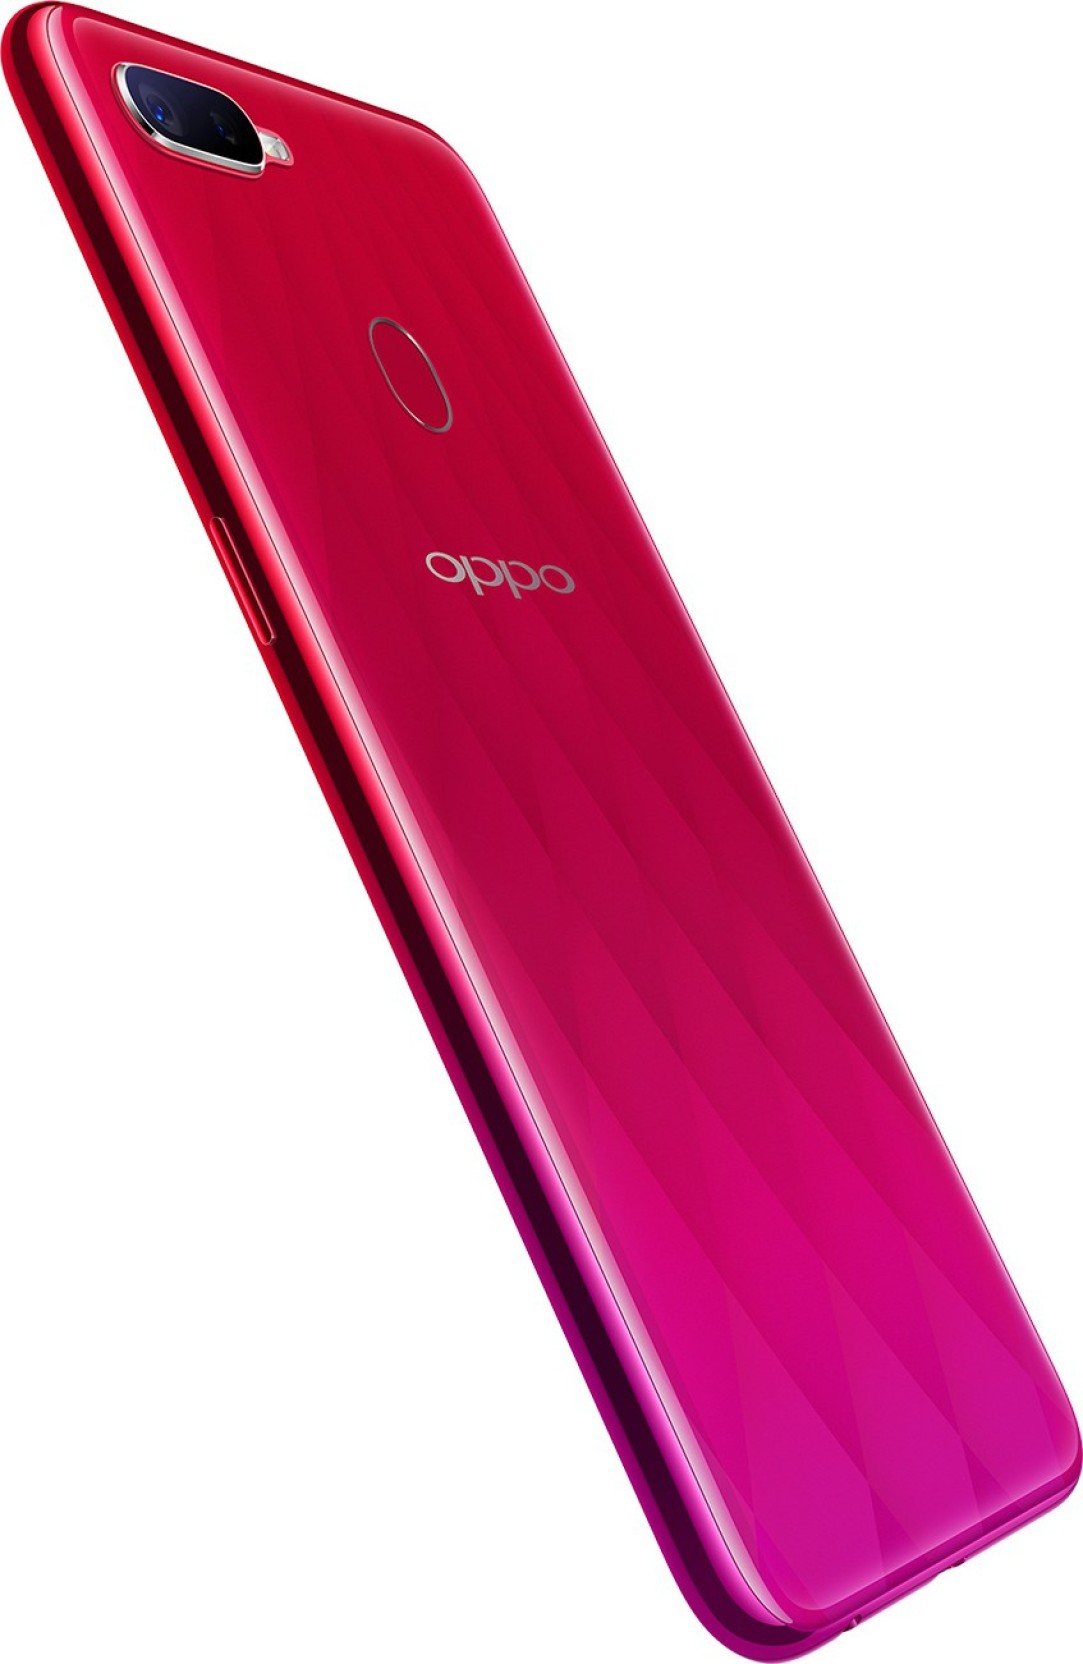 Oppo F9 specs, review, release date - PhonesData